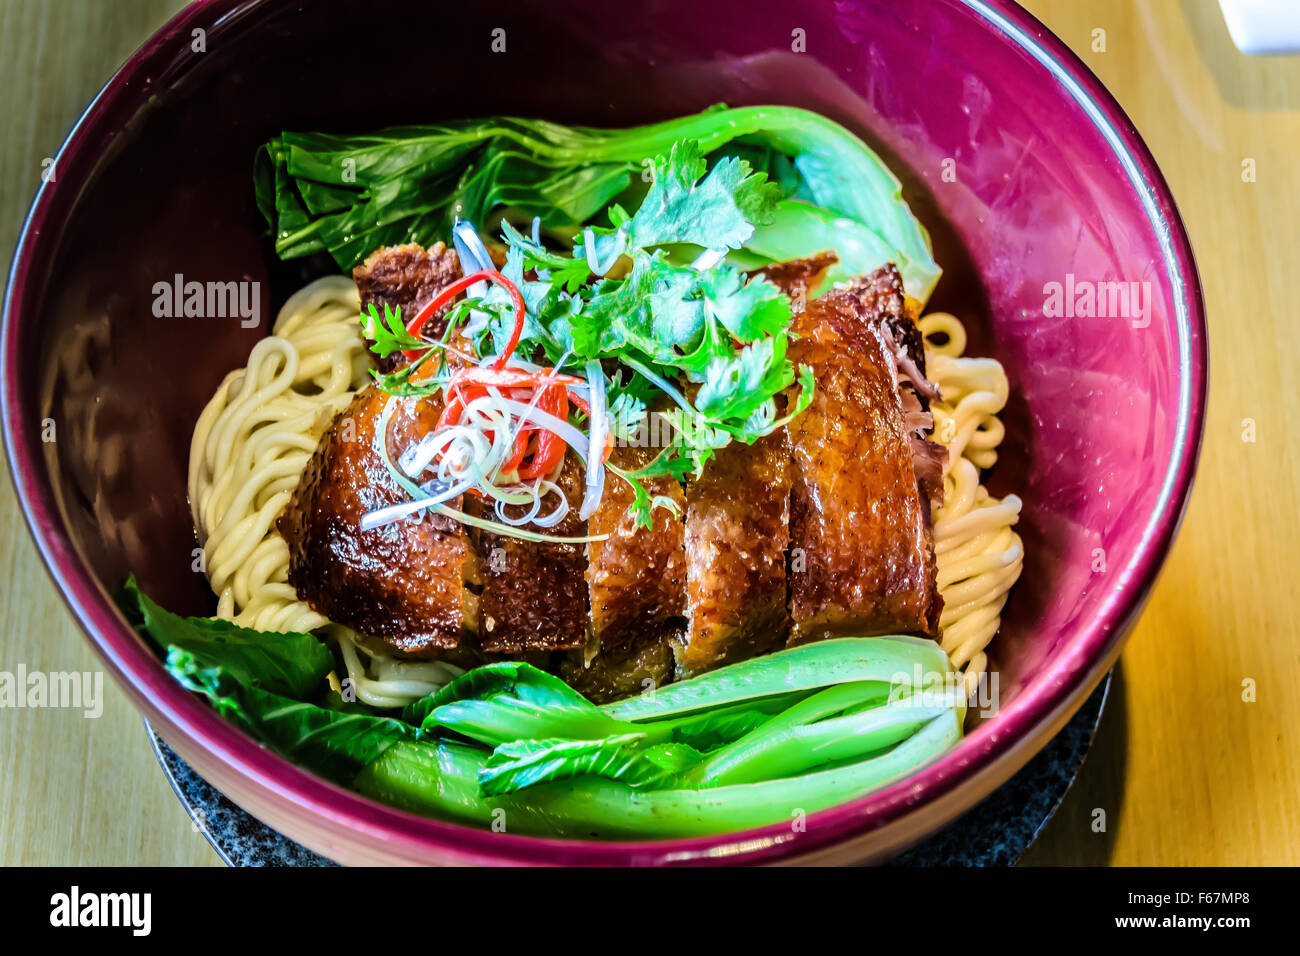 Roast chicken and noodles Chinese cuisine Stock Photo